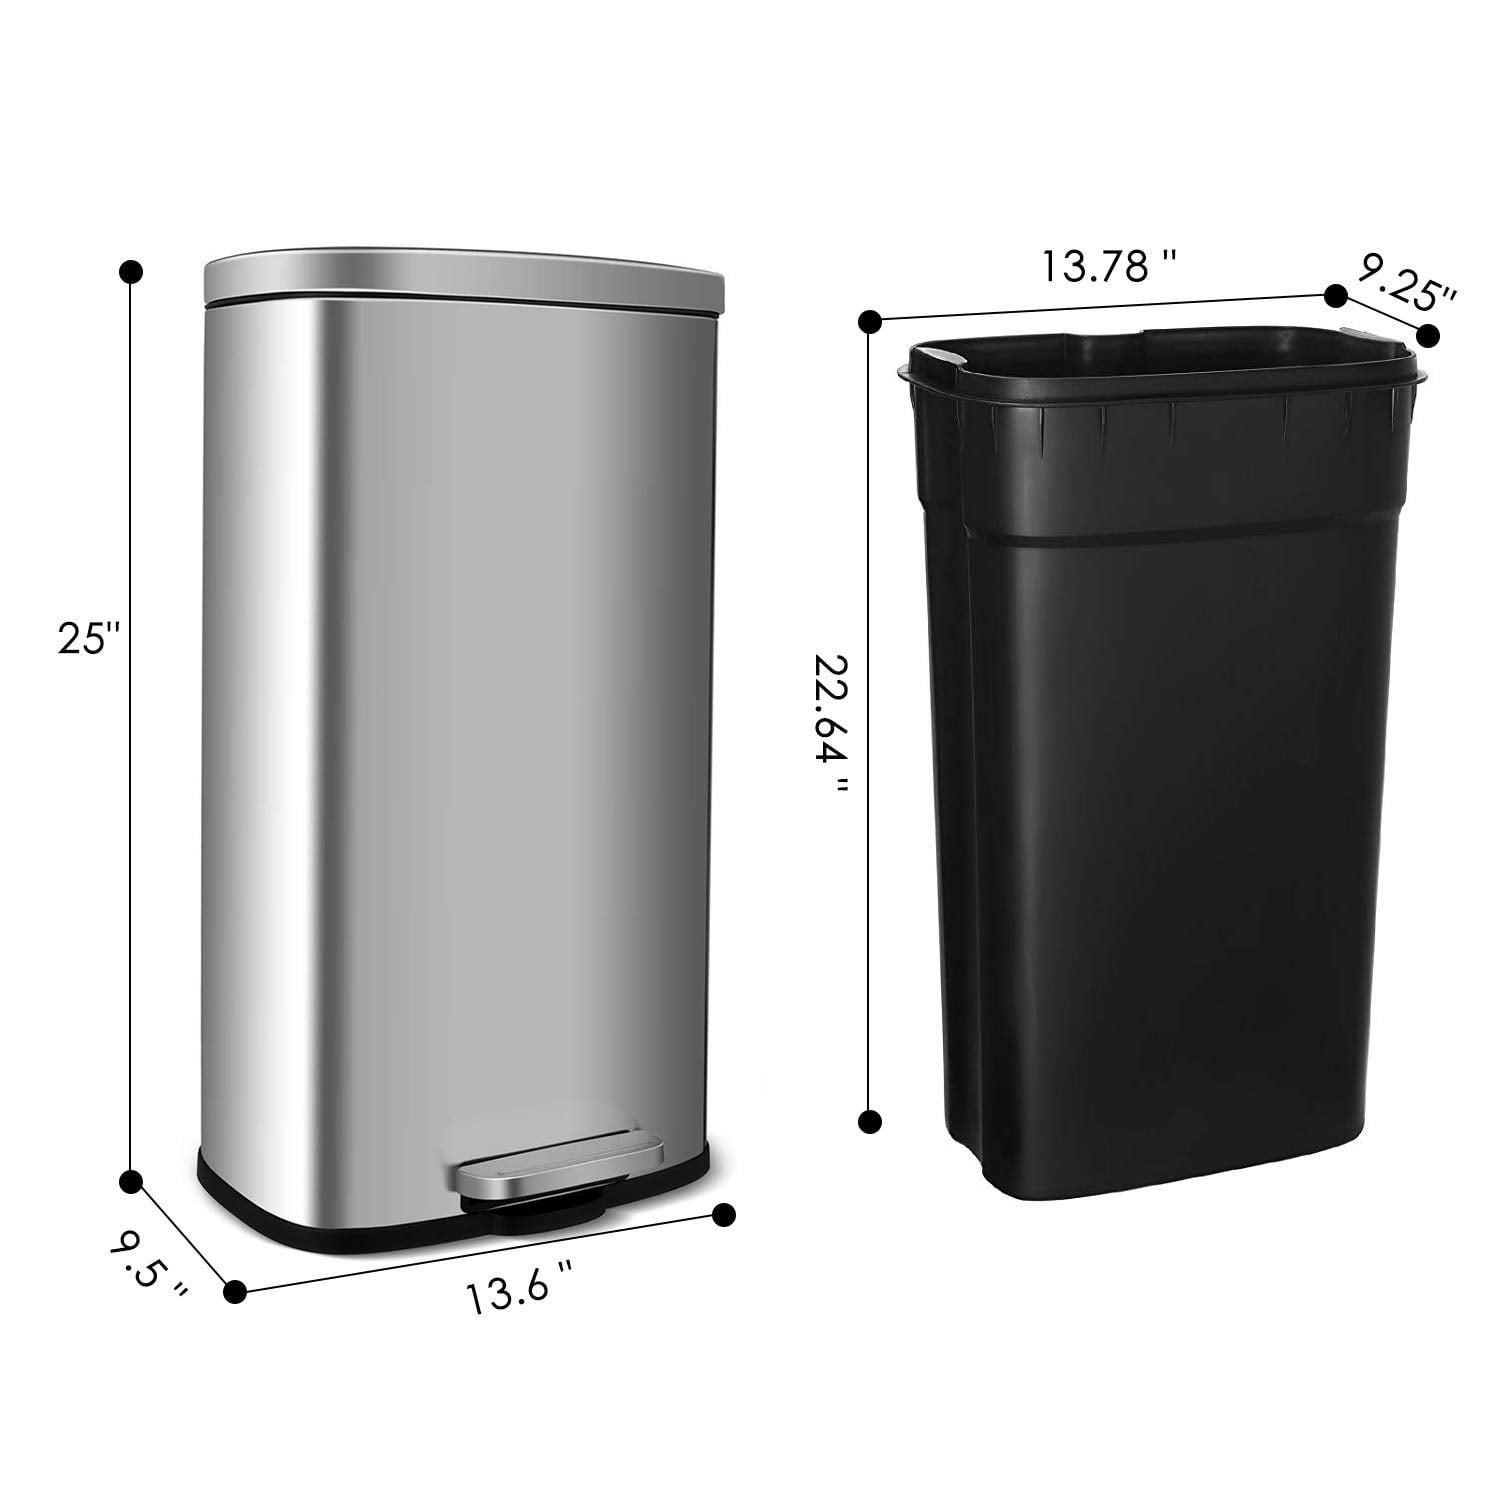 LAZY BUDDY 30 Liter 8 Gallon Trash Can with Foot Pedal, Stainless